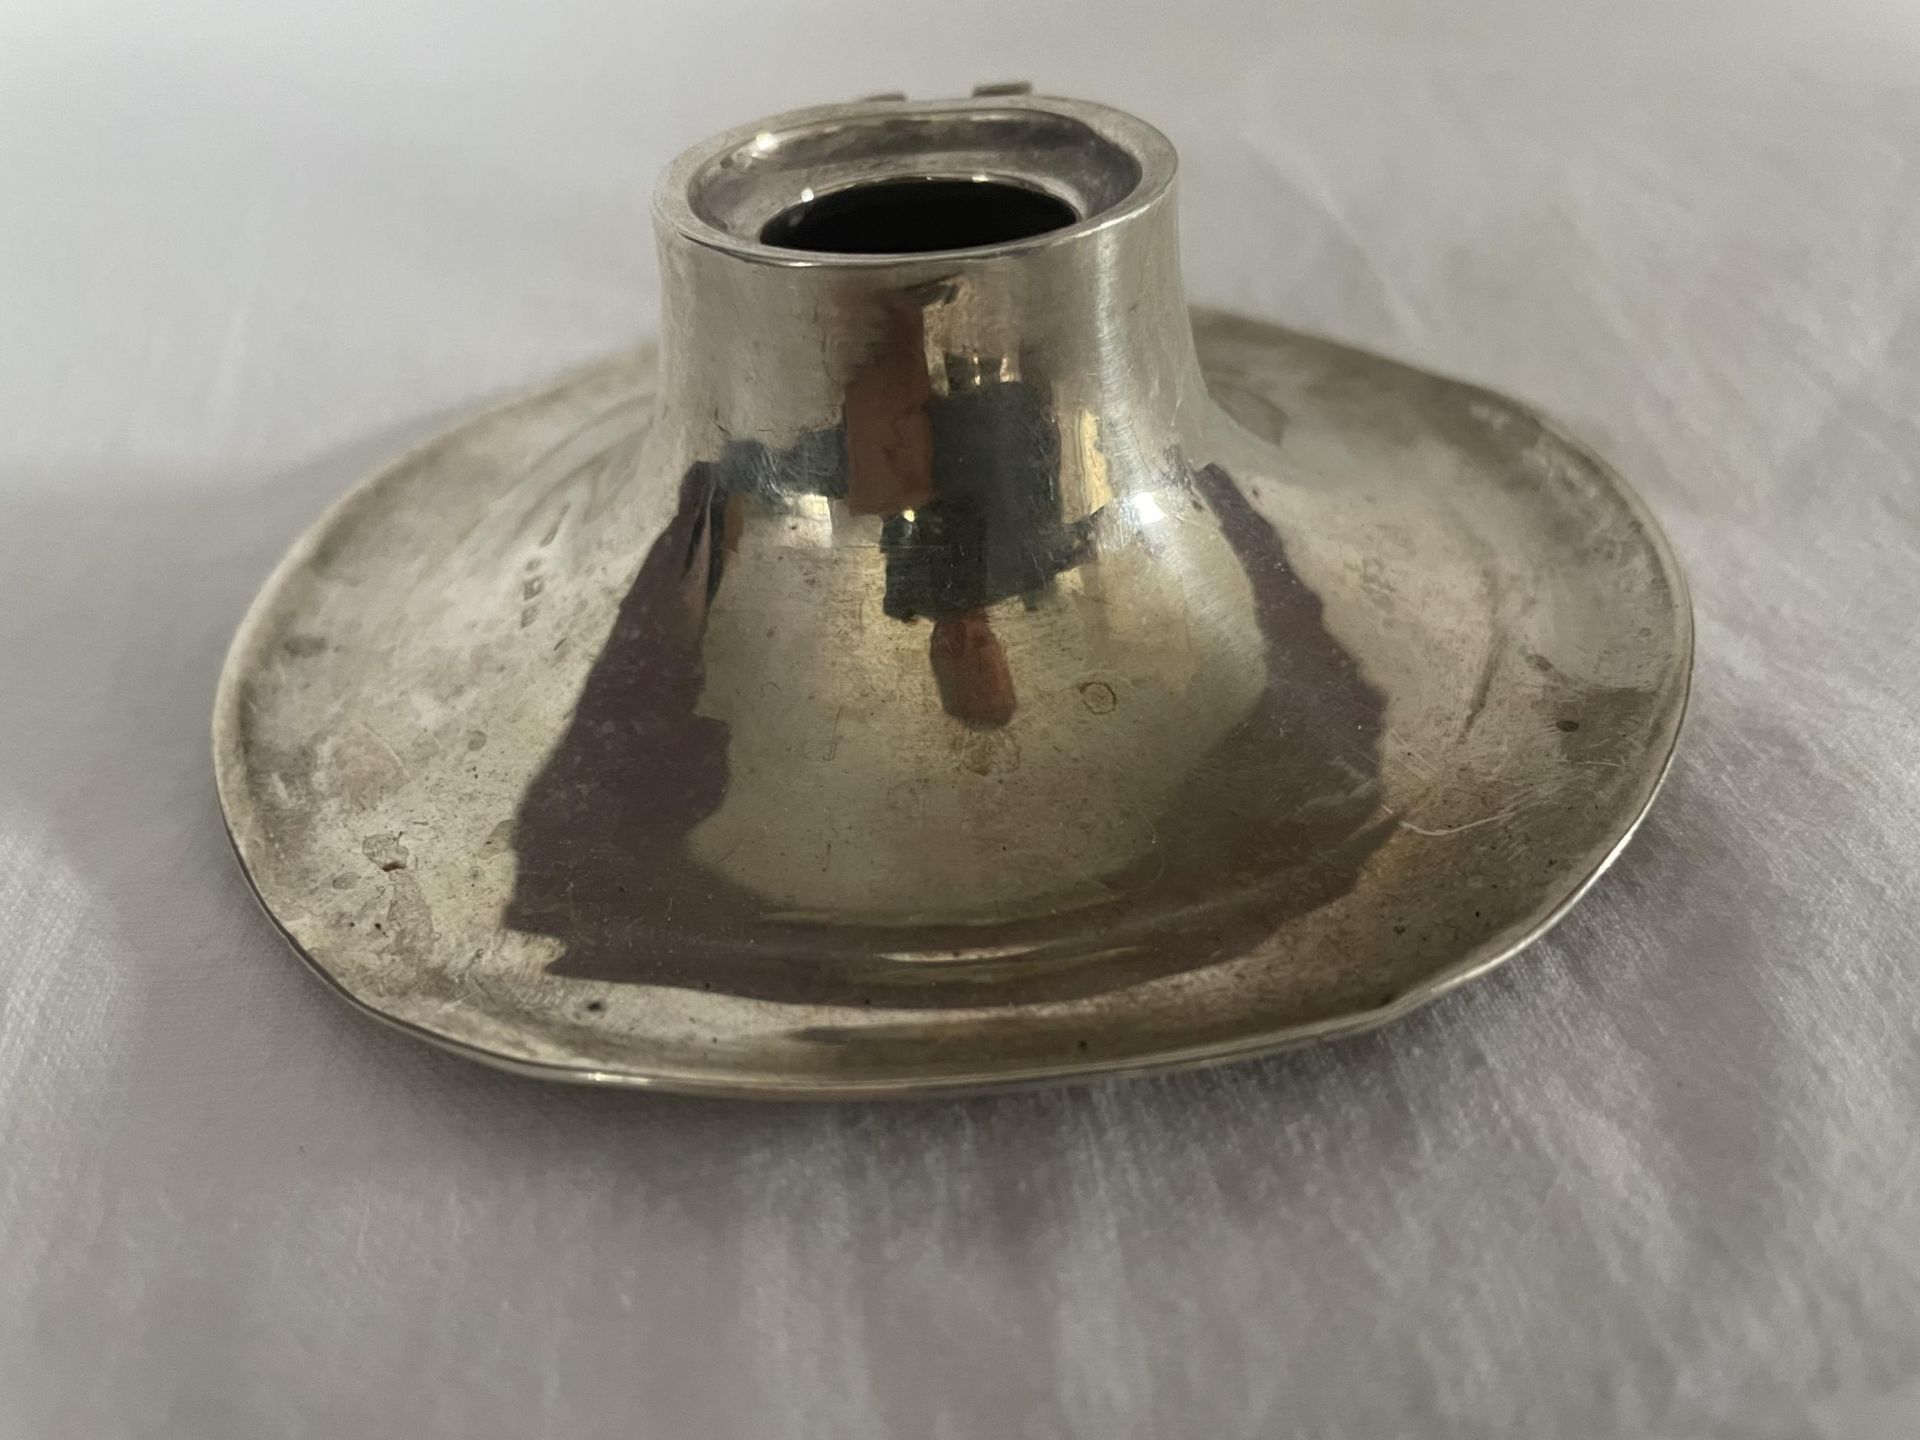 A HALLMARKED BIRMINGHAM SILVER INKWELL (MISSING COVER), DIAMETER 10 CM - 83 GRAMS (INCLUDING - Image 3 of 4